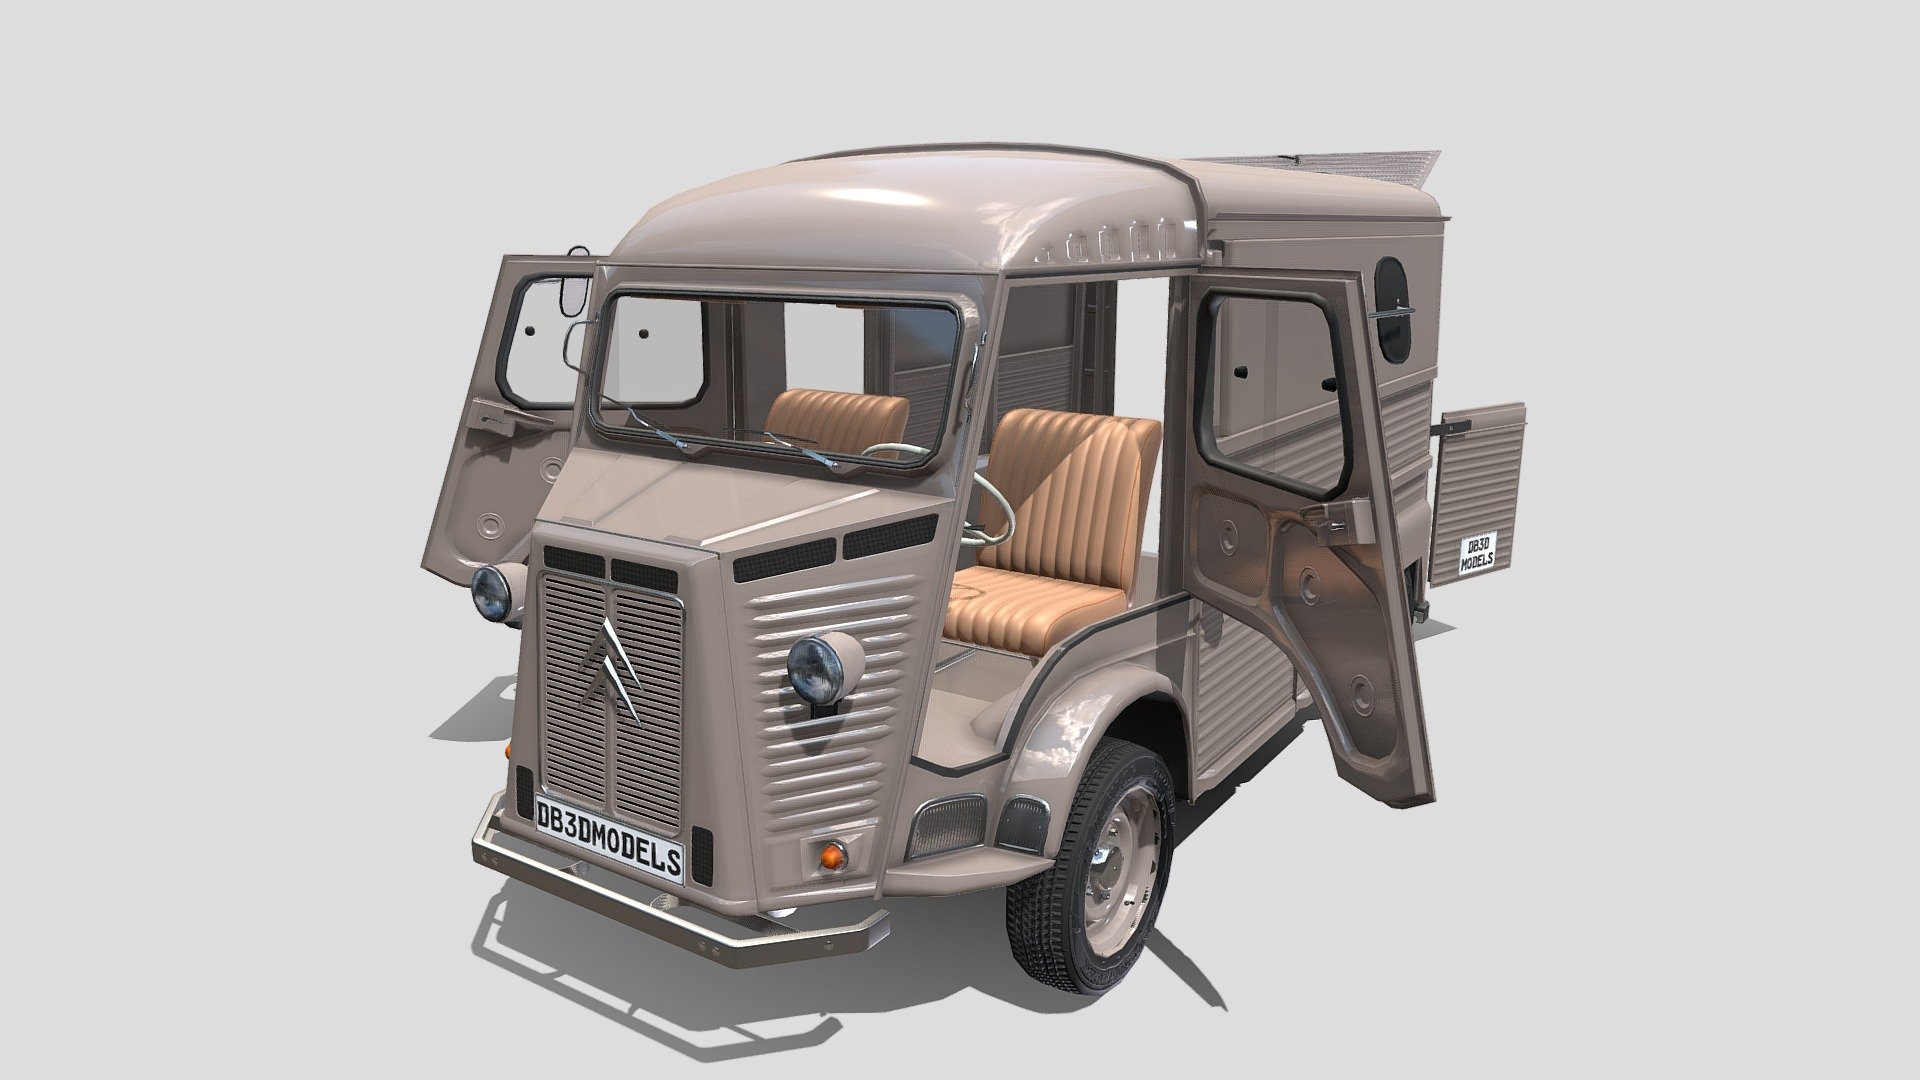 Highly detailed Citroen HY 3D model rendered with Cycles in Blender, as per seen on attached images.

The model is very intricately built, it has the interior modeled, with the rear cargo area, and a simple underbody built as well. 

The 3d model is scaled to original size in Blender.

File formats:

-.blend, rendered with cycles, as seen in the images;

-.blend, rendered with cycles, as seen in the images, with doors open;

-.obj, with materials applied;

-.obj, with materials applied, with doors open;

-.dae, with materials applied;

-.dae, with materials applied, with doors open;

-.fbx, with materials applied;

-.fbx, with materials applied, with doors open;

-.stl;

-.stl, with doors open;

Files come named appropriately and split by file format.

3D Software:

The 3D model was originally created in Blender 3.1 and rendered with Cycles 3d model